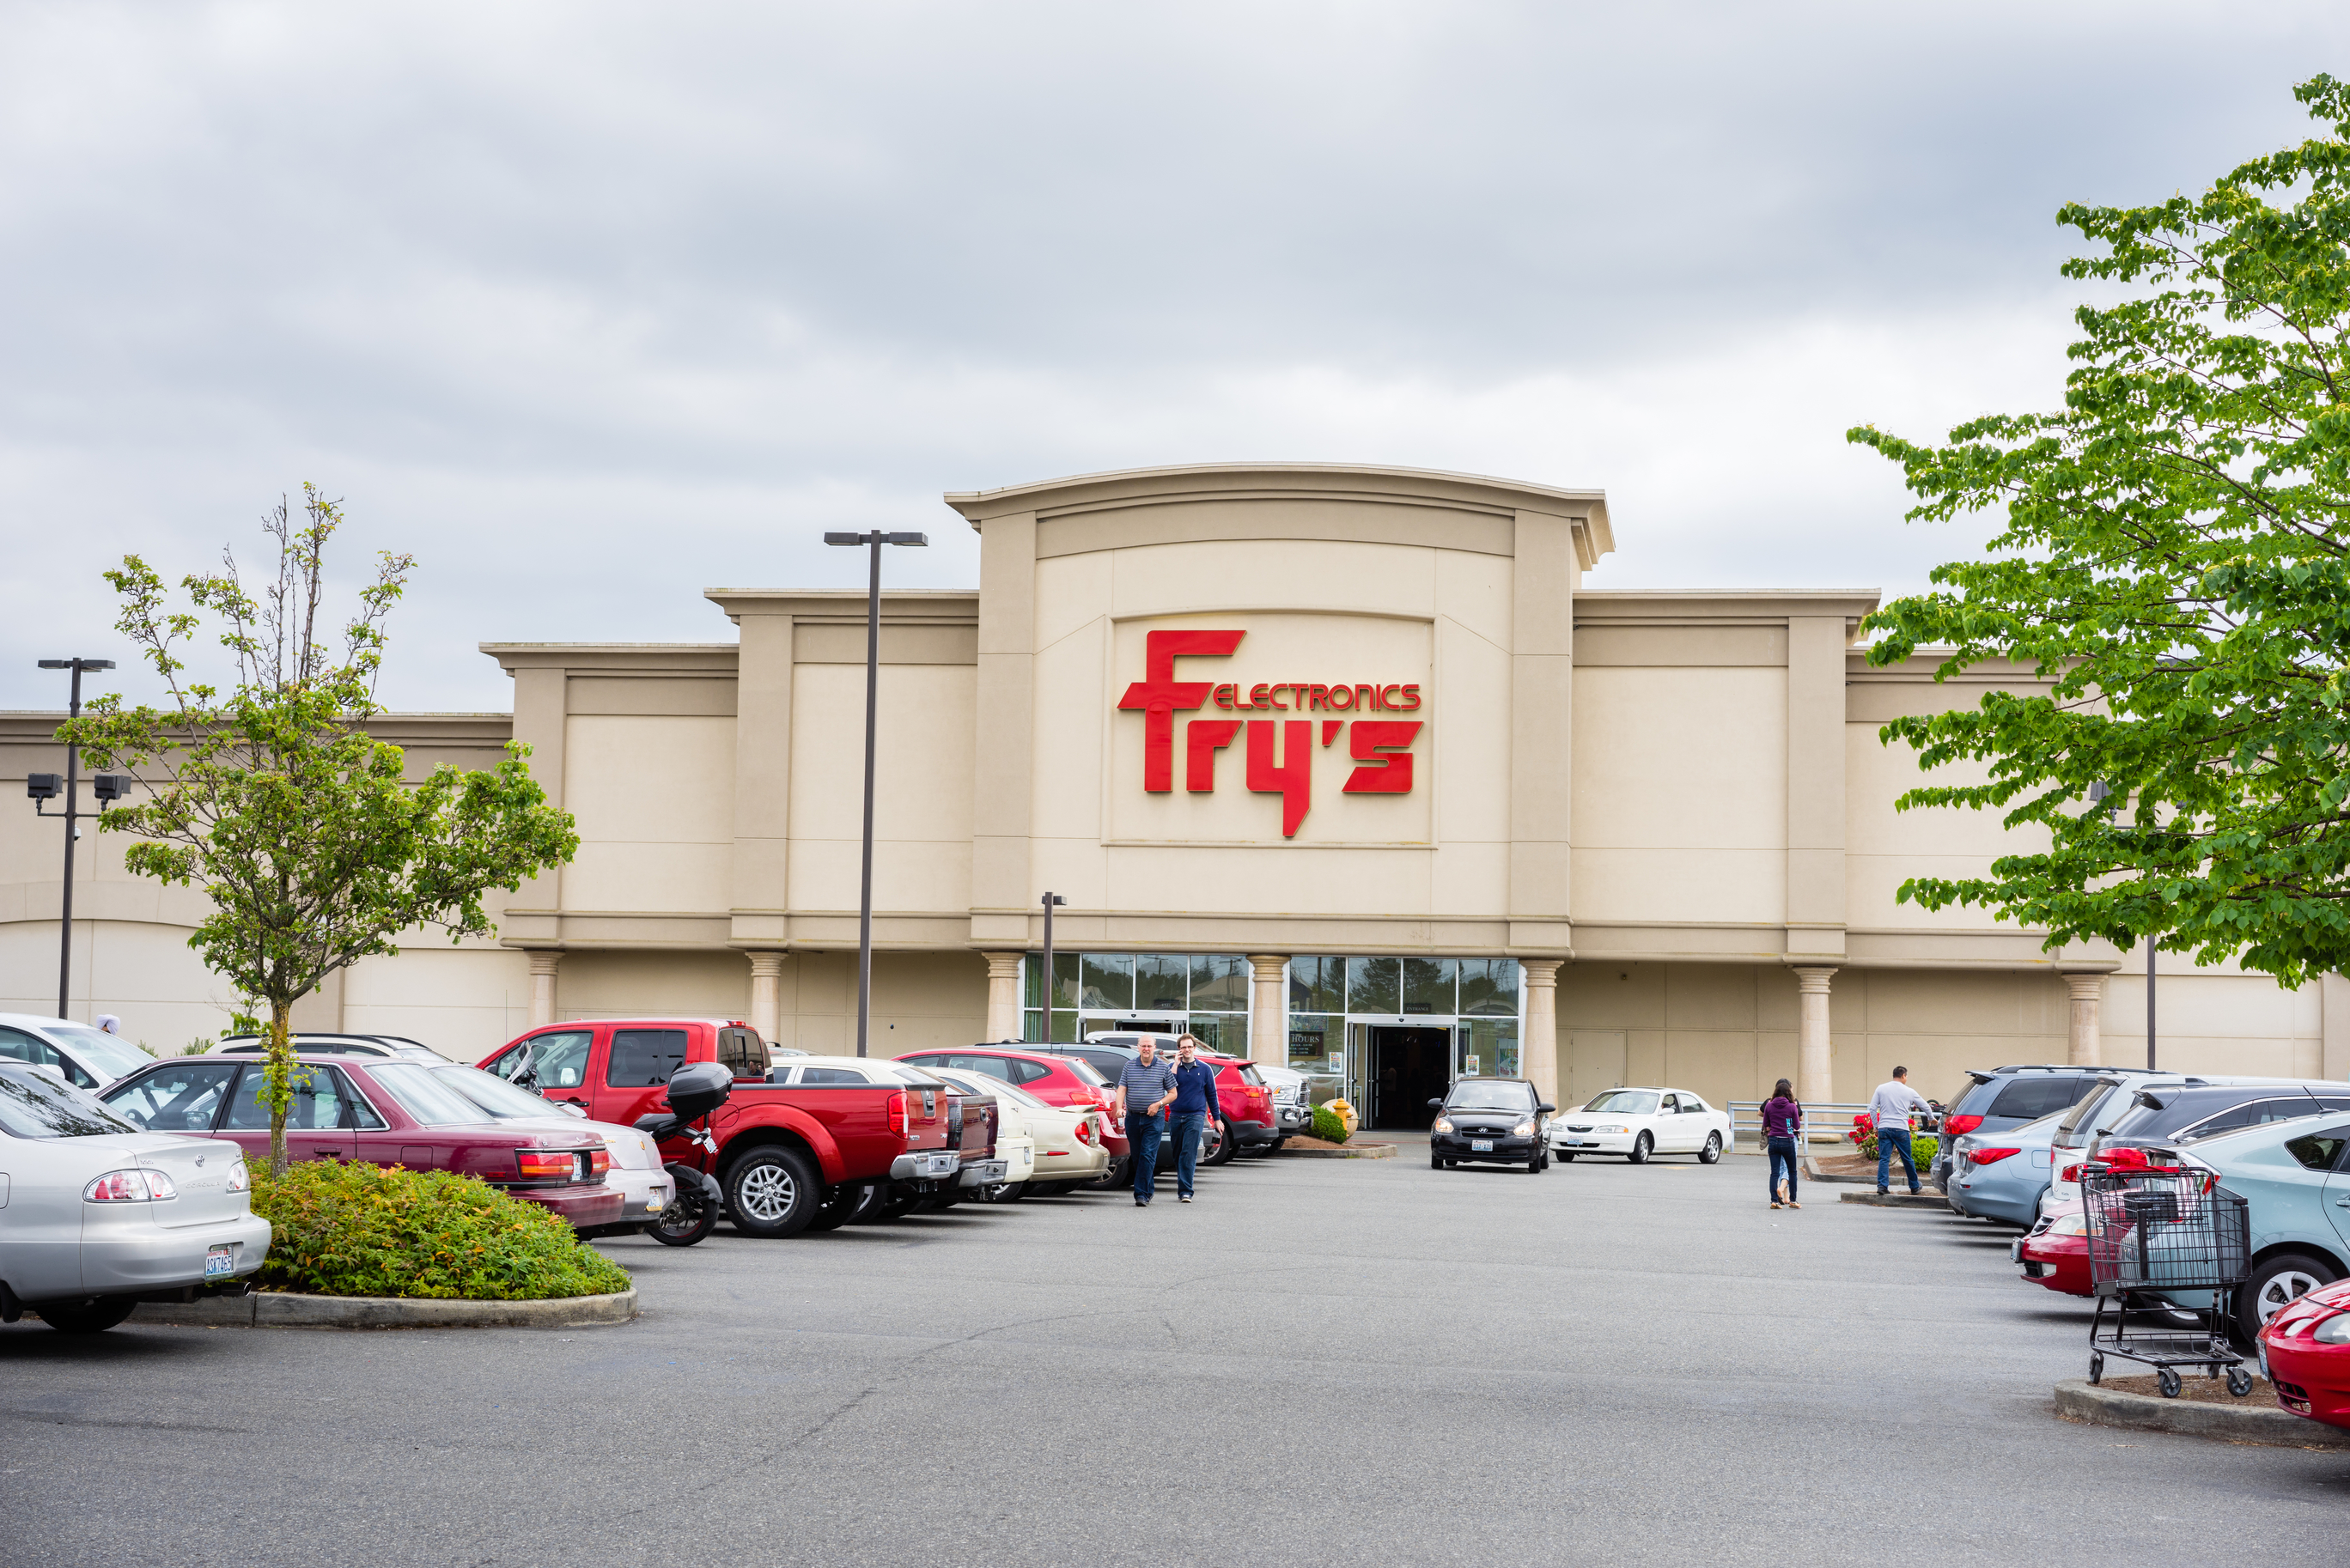 Fry’s promo code: Get daily deals!